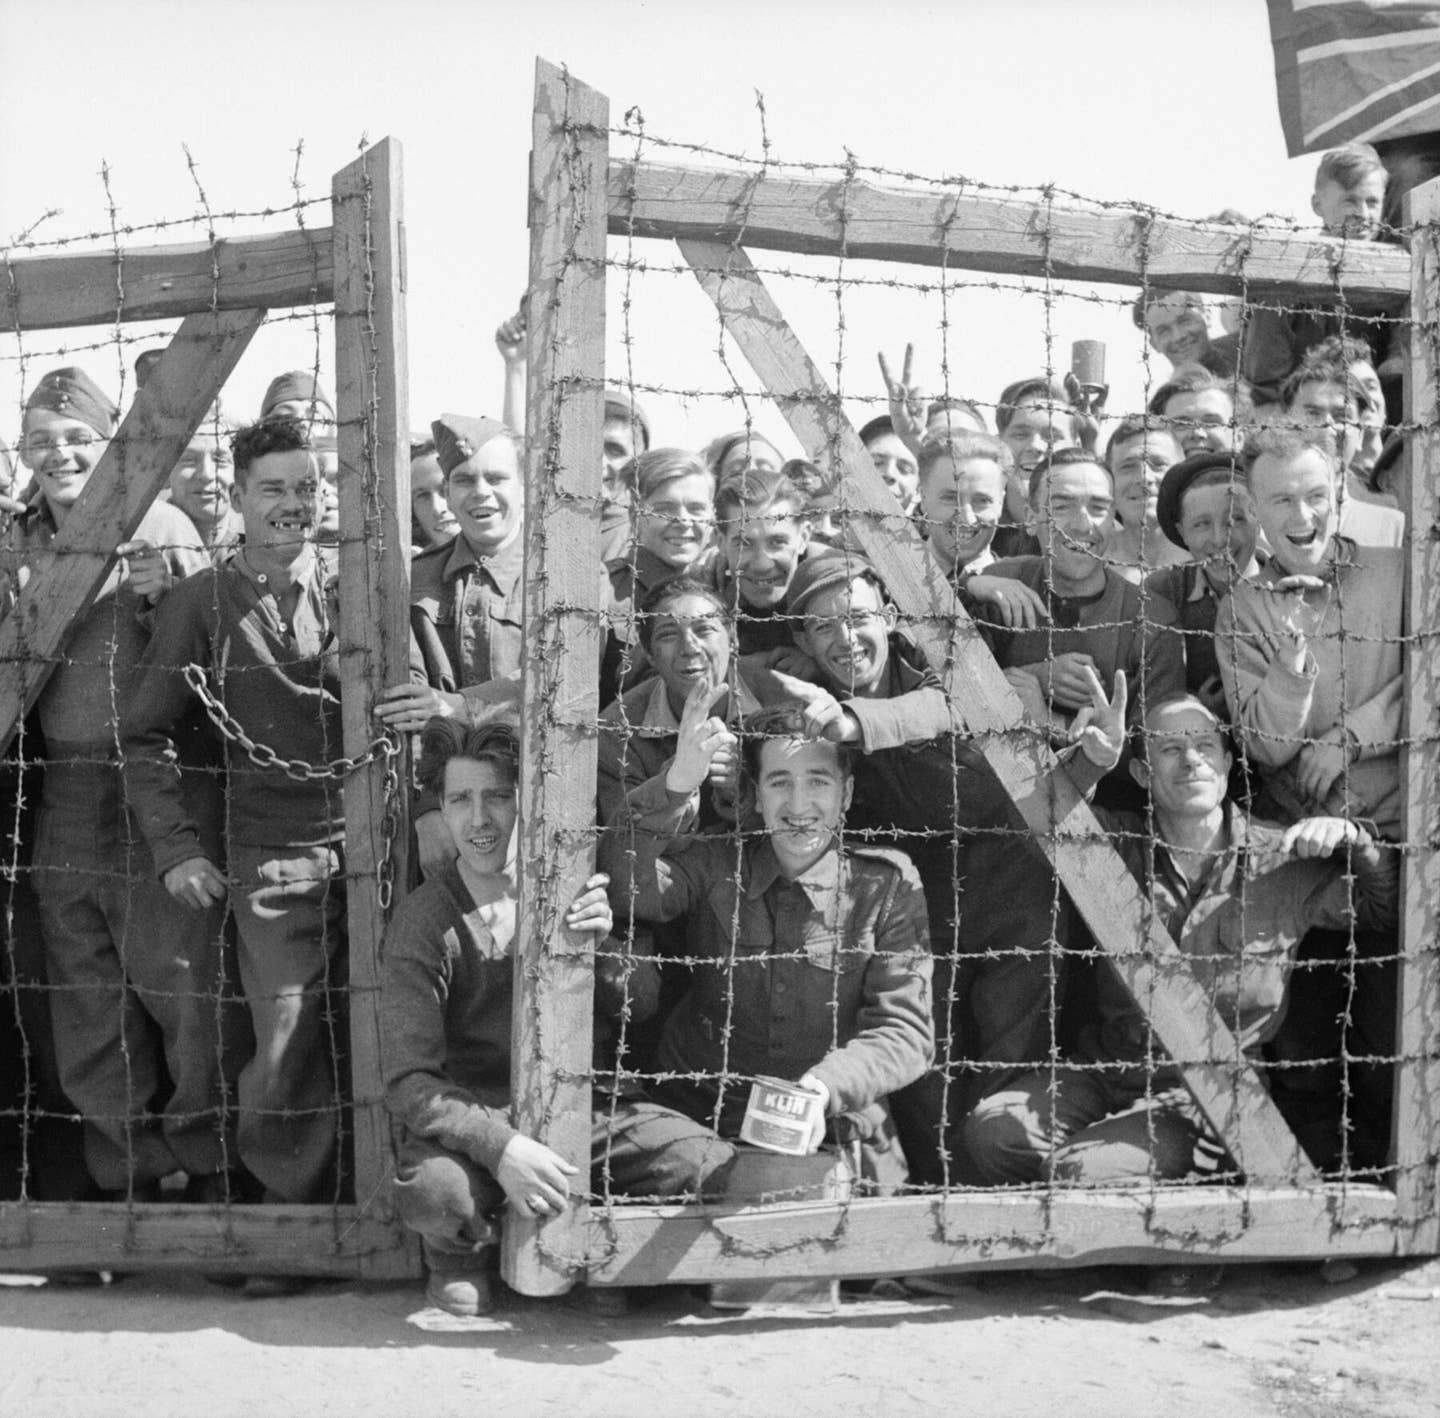 POWs at Stalag 11B at Fallingbostel in Germany welcome their liberators, 1945.